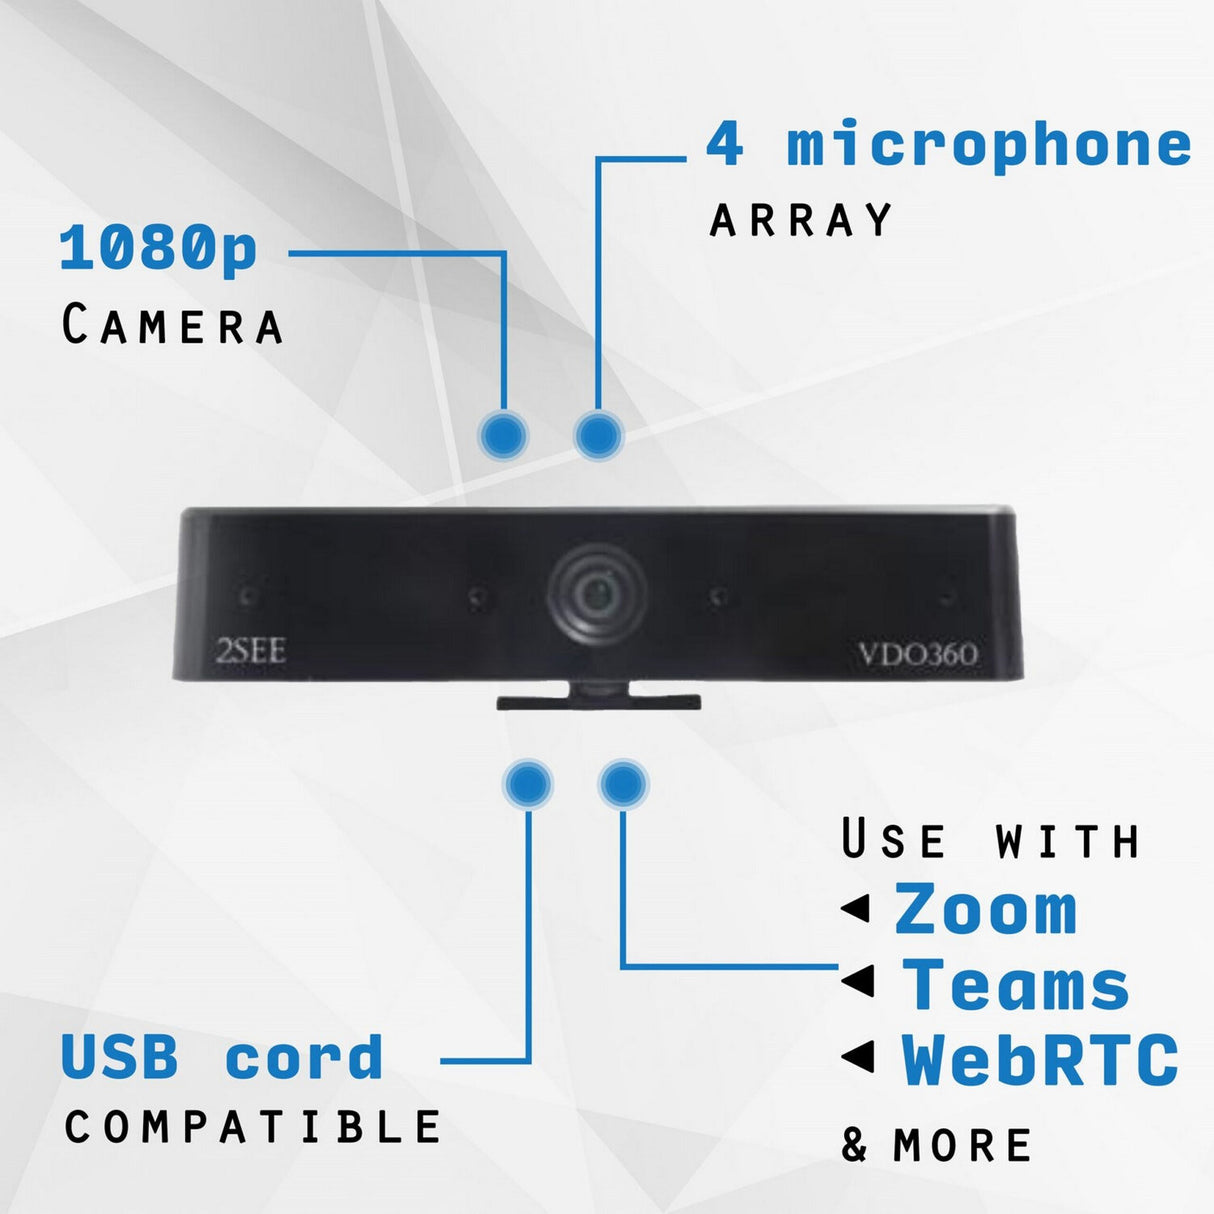 VDO360 VDOS4M 2SEE Personal Visual Collaboration Camera with Built-In Microphones, Black